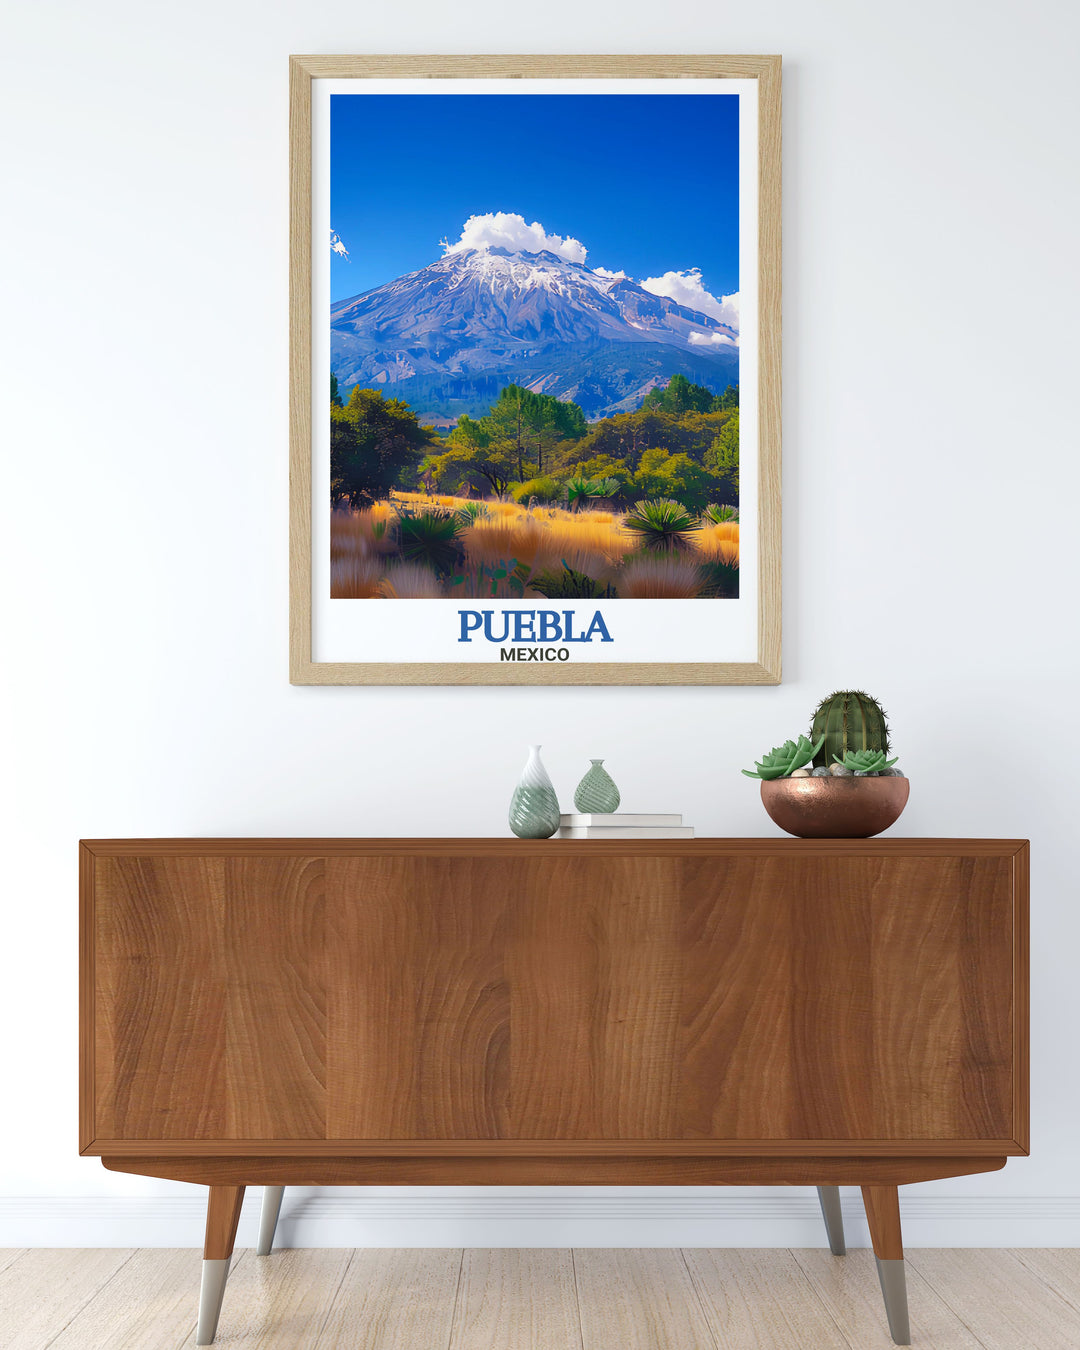 Puebla Wall Art with intricate details and colorful street scenes La Malinche Stunning Prints featuring majestic views of the volcano perfect for enhancing any living room decor unique travel poster prints that bring Mexicos beauty into your space